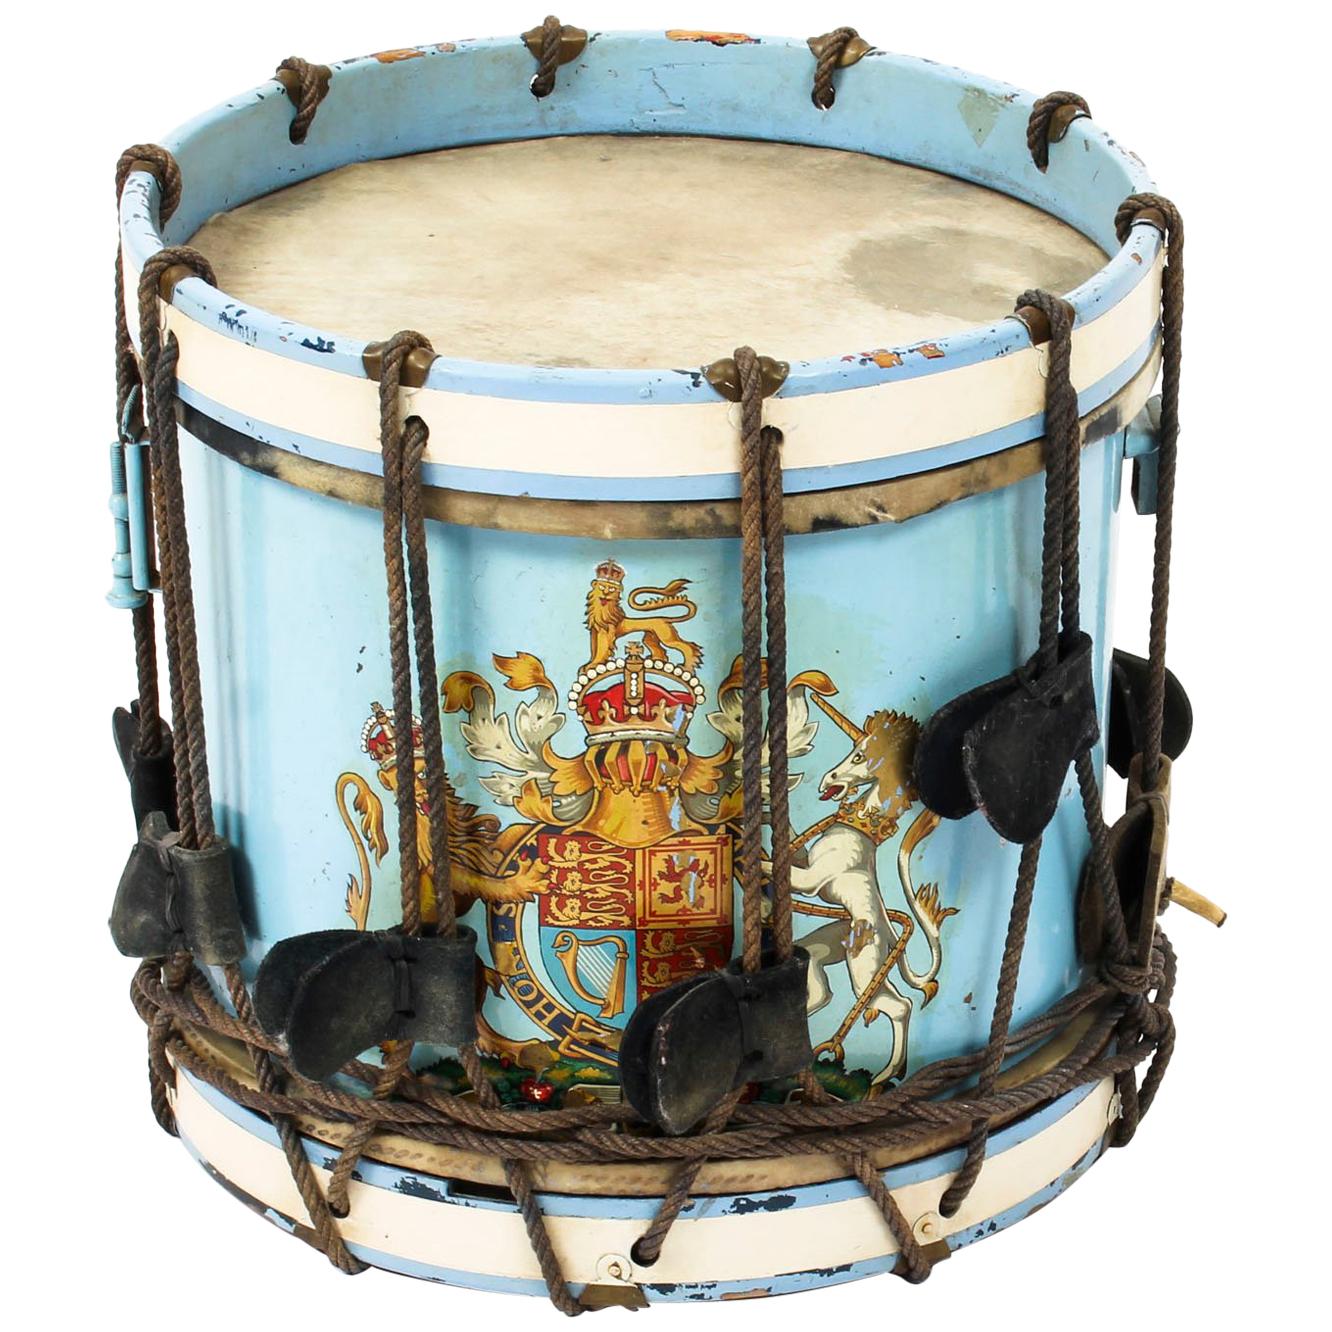 Antique Military Drum with British Royal Coat of Arms, Late 19th Century